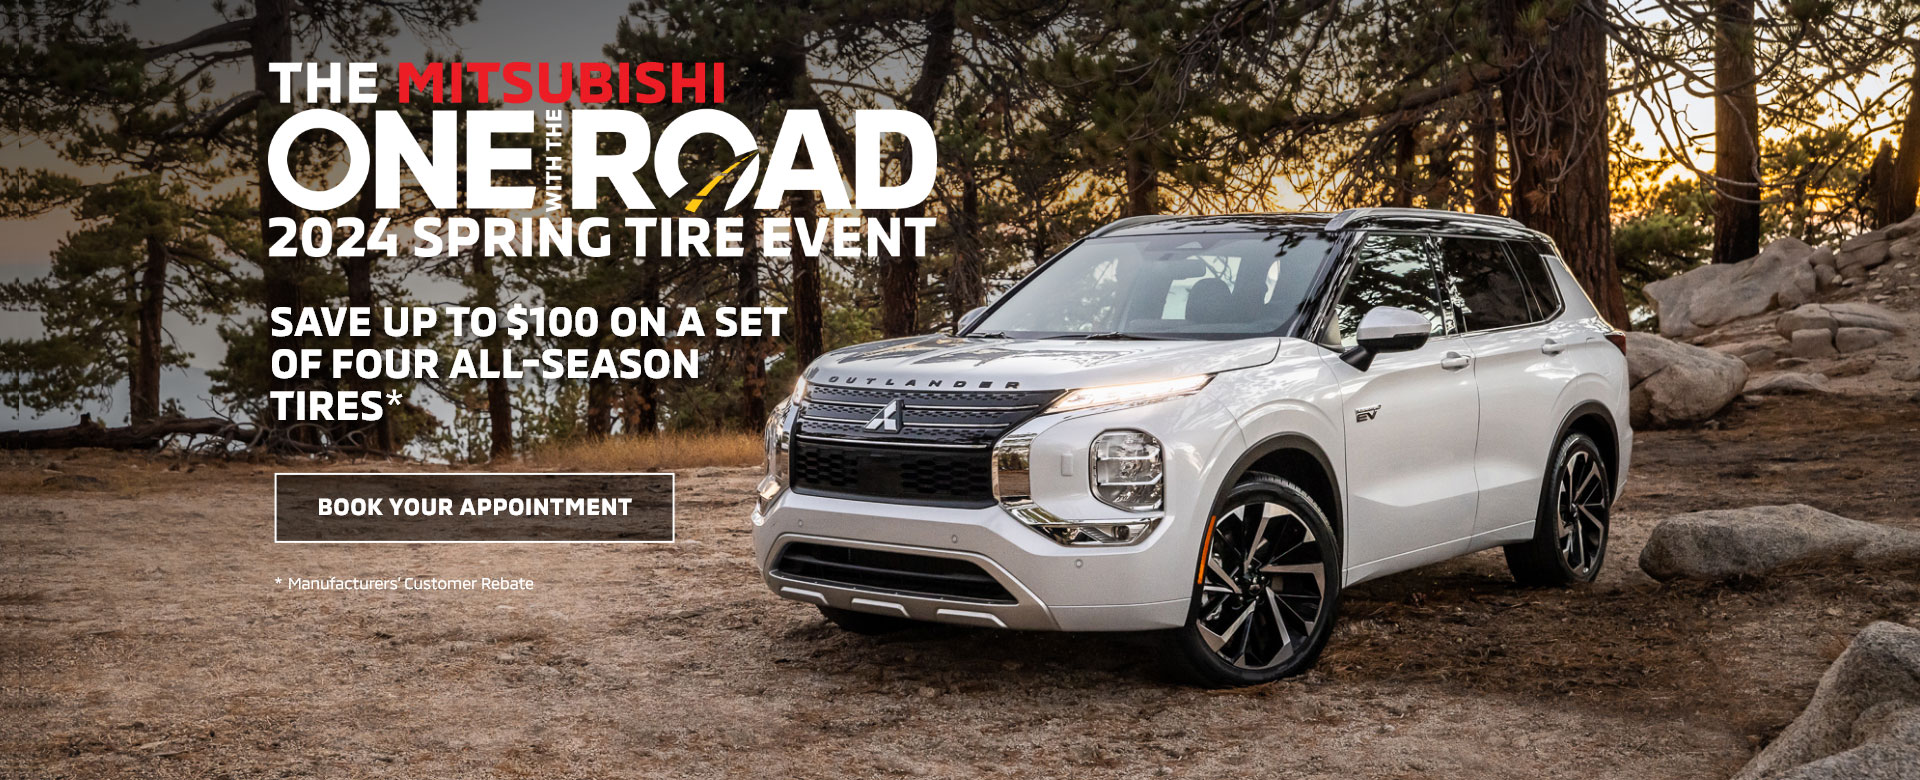 The Mitsubishi One with the Road 2024 Spring Tire Event